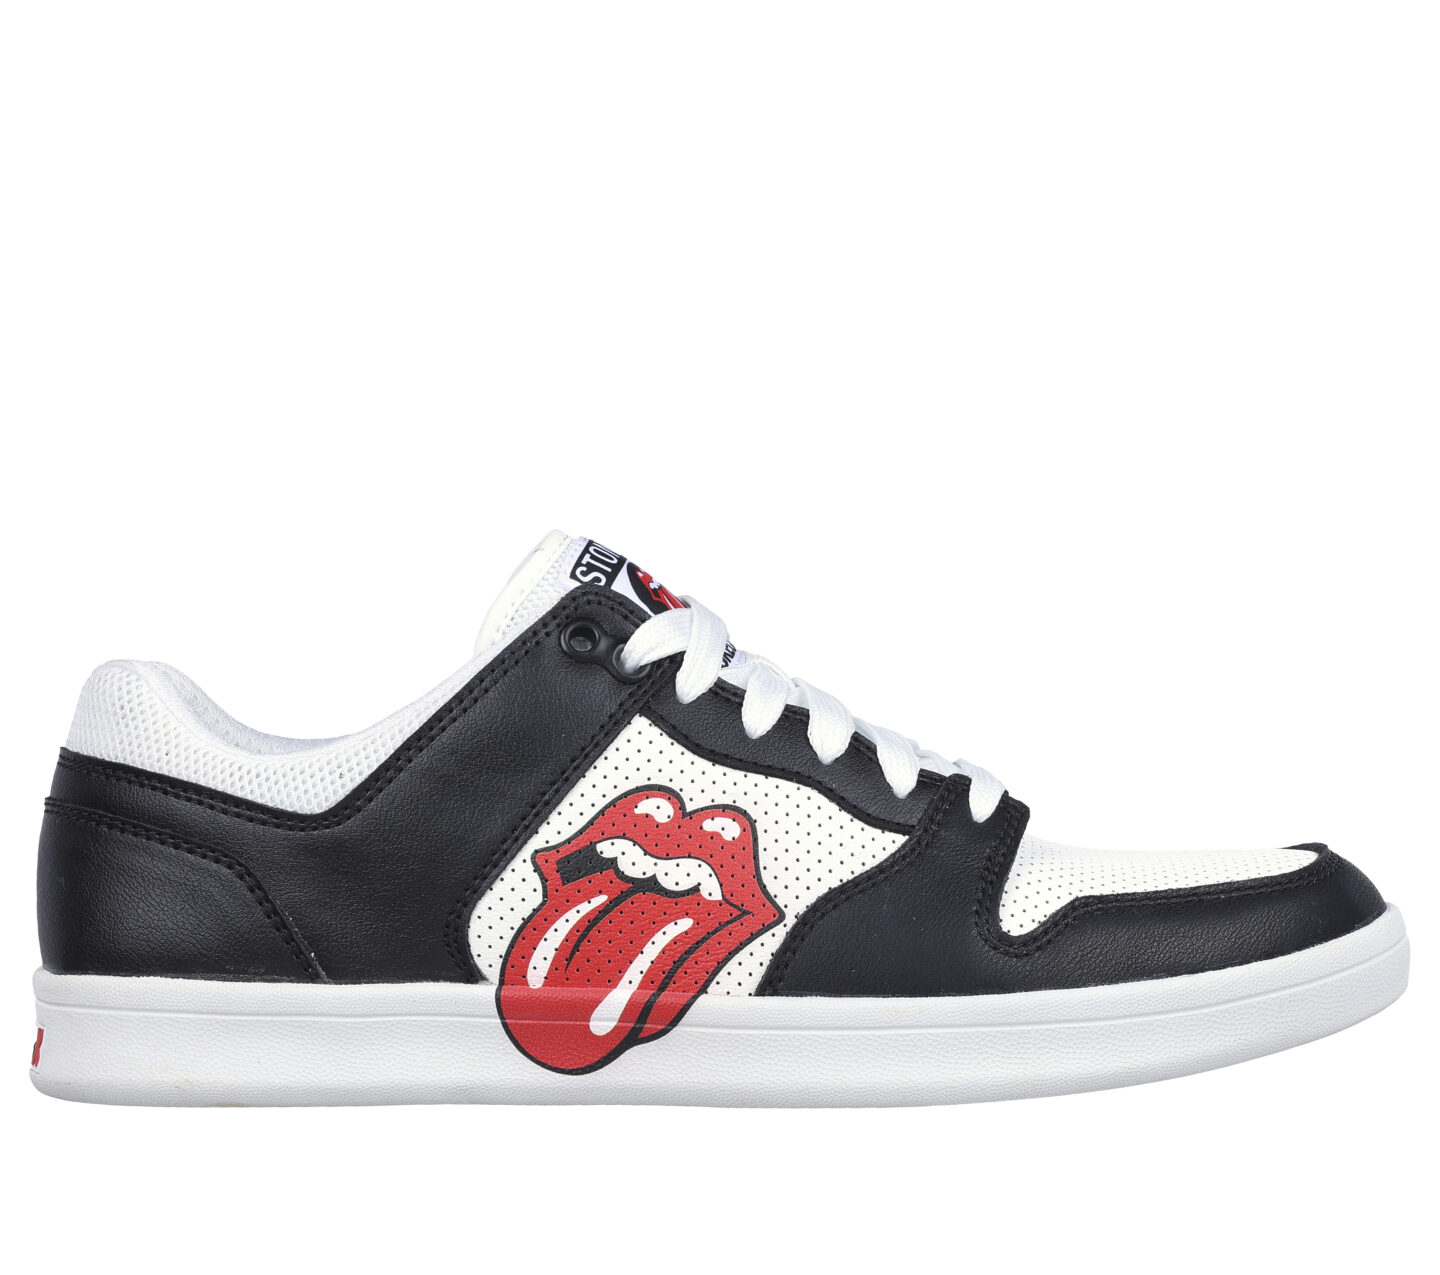 SKECHERS X THE ROLLING STONES: CLASSIC CUP – EURO LICK 210745 BKW